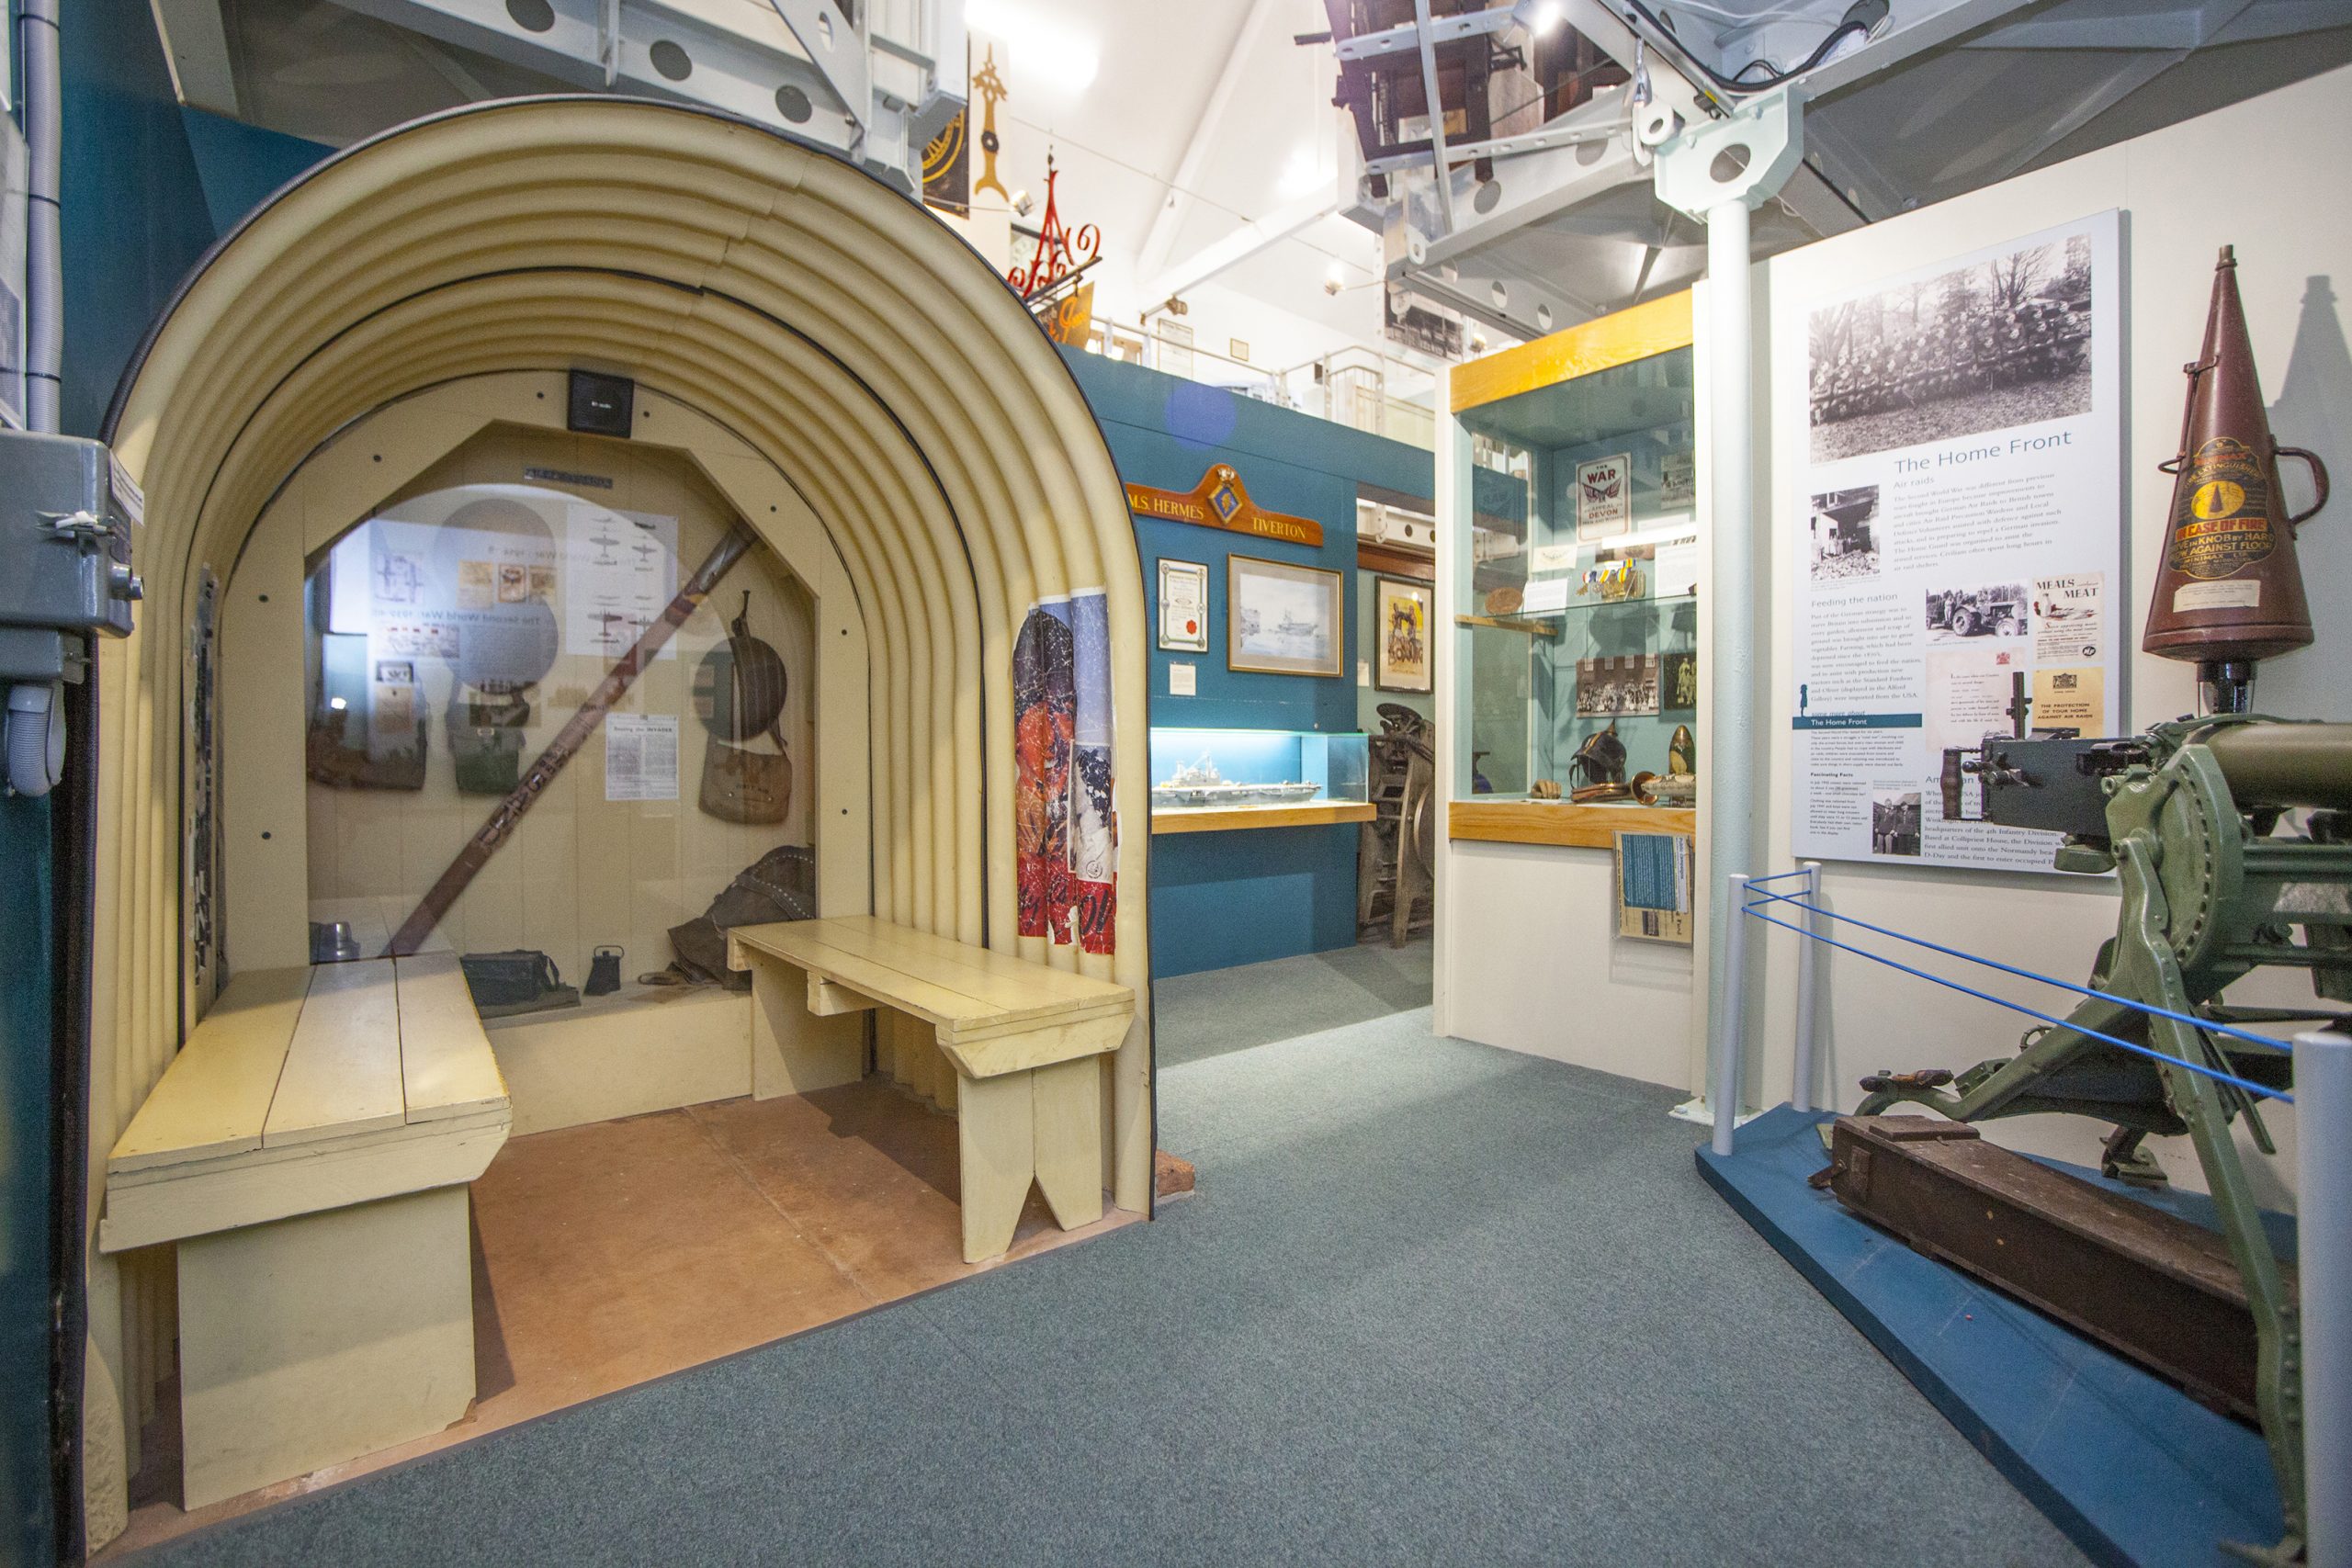 An Anderson airraid shelter on display in a museum gallery.